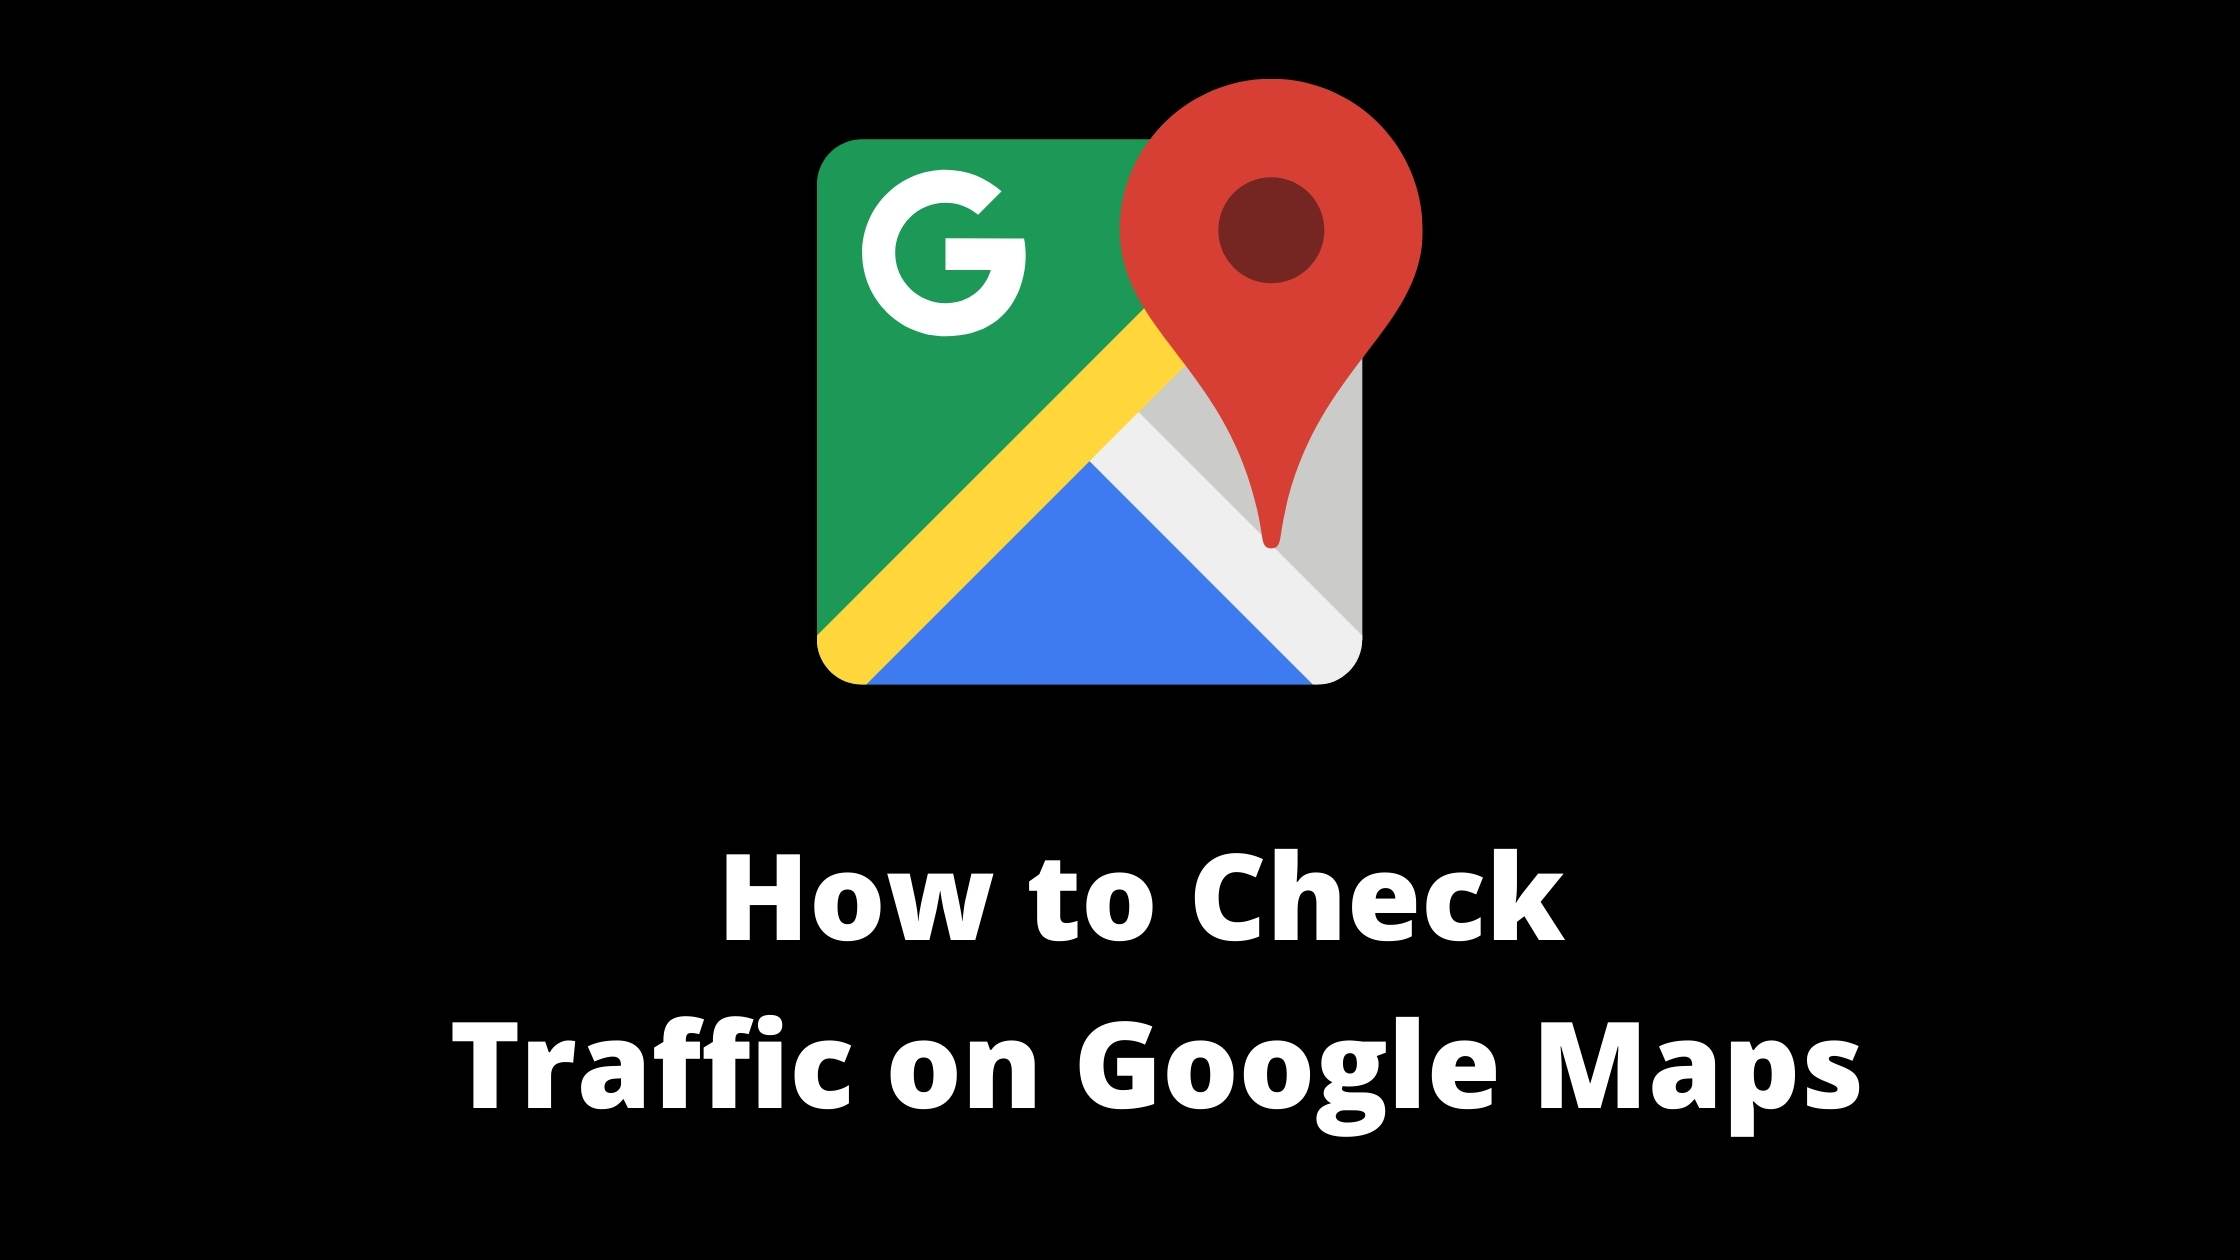 how to check traffic in Google Maps